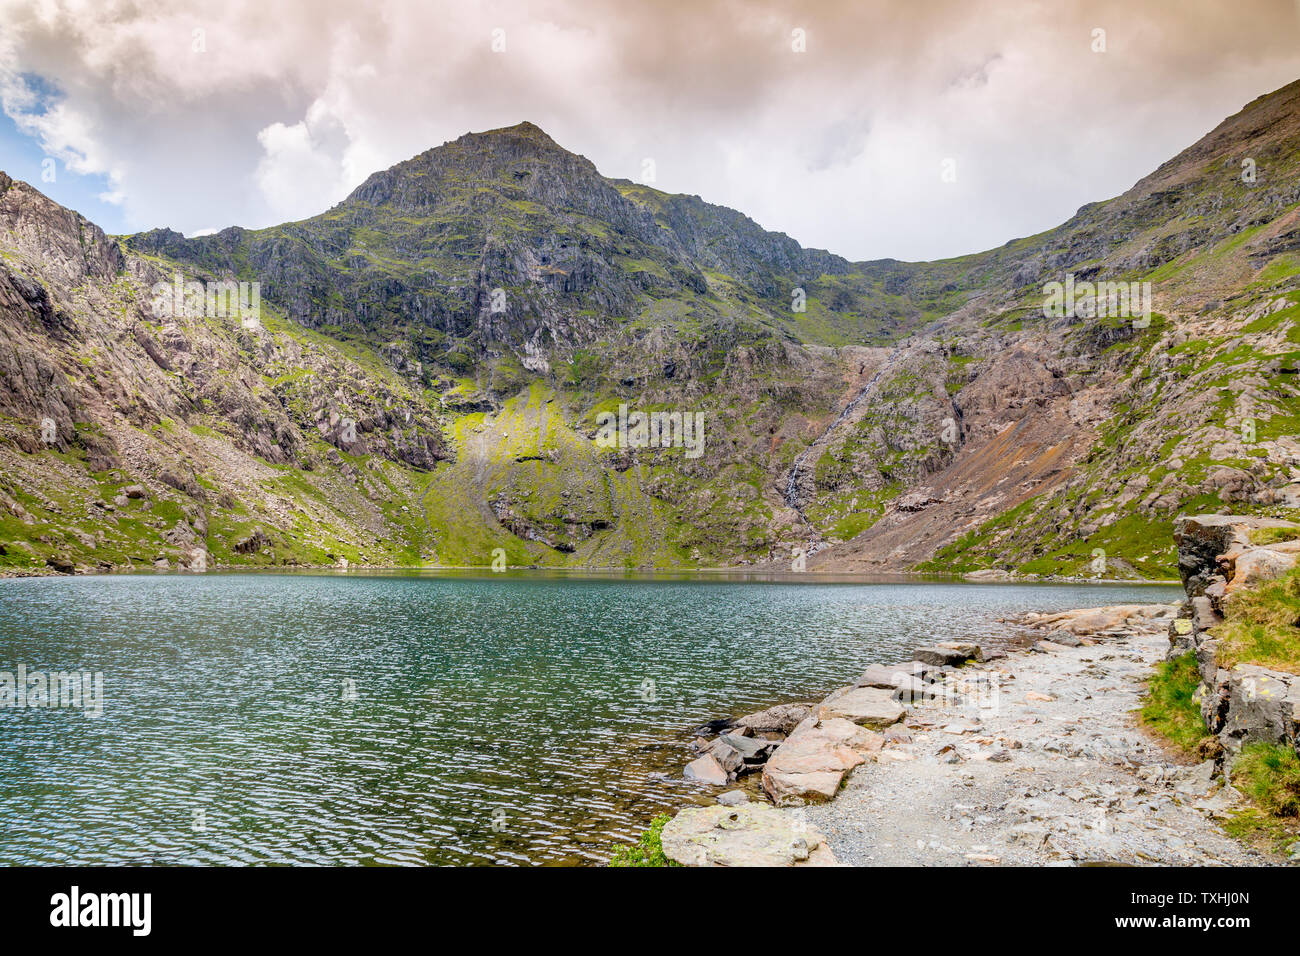 The east face of Snowdon (3,560ft) and Glaslyn lake as viewed from the Miners Track, Snowdonia National Park, Gwynedd, Wales, UK Stock Photo